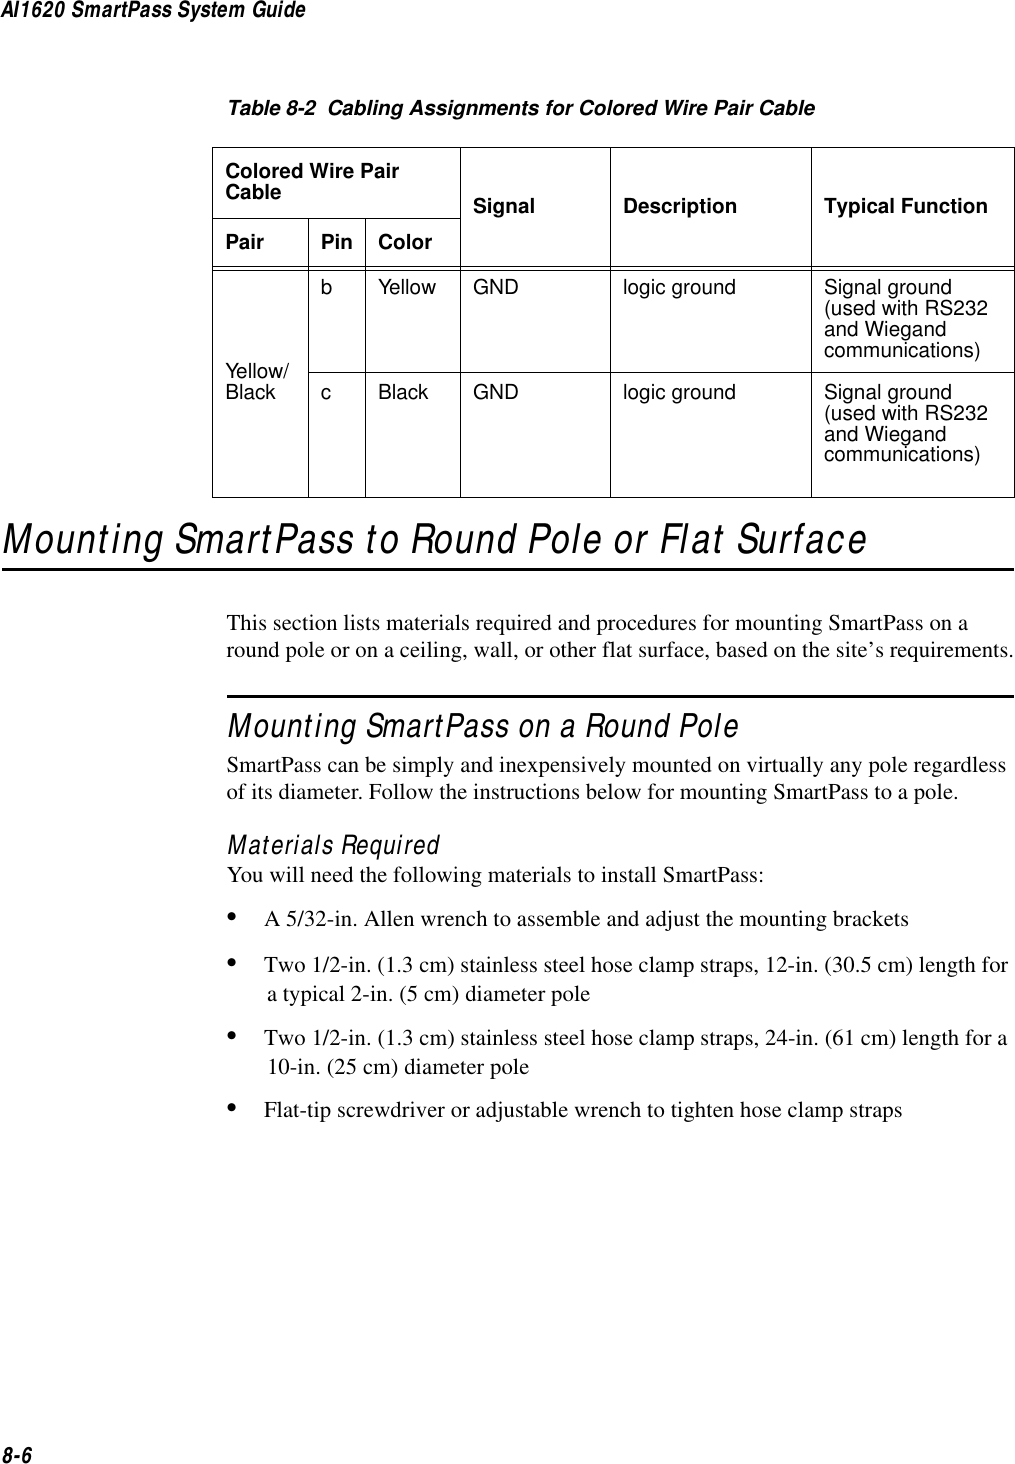 AI1620 SmartPass System Guide8-6Mounting SmartPass to Round Pole or Flat SurfaceThis section lists materials required and procedures for mounting SmartPass on a round pole or on a ceiling, wall, or other flat surface, based on the site’s requirements.Mounting SmartPass on a Round PoleSmartPass can be simply and inexpensively mounted on virtually any pole regardless of its diameter. Follow the instructions below for mounting SmartPass to a pole.Materials Required You will need the following materials to install SmartPass:•A 5/32-in. Allen wrench to assemble and adjust the mounting brackets•Two 1/2-in. (1.3 cm) stainless steel hose clamp straps, 12-in. (30.5 cm) length for a typical 2-in. (5 cm) diameter pole •Two 1/2-in. (1.3 cm) stainless steel hose clamp straps, 24-in. (61 cm) length for a 10-in. (25 cm) diameter pole•Flat-tip screwdriver or adjustable wrench to tighten hose clamp strapsYellow/BlackbYellow GND logic ground Signal ground (used with RS232 and Wiegand communications)cBlack GND logic ground Signal ground (used with RS232 and Wiegand communications)Table 8-2  Cabling Assignments for Colored Wire Pair CableColored Wire Pair Cable Signal Description Typical FunctionPair Pin Color